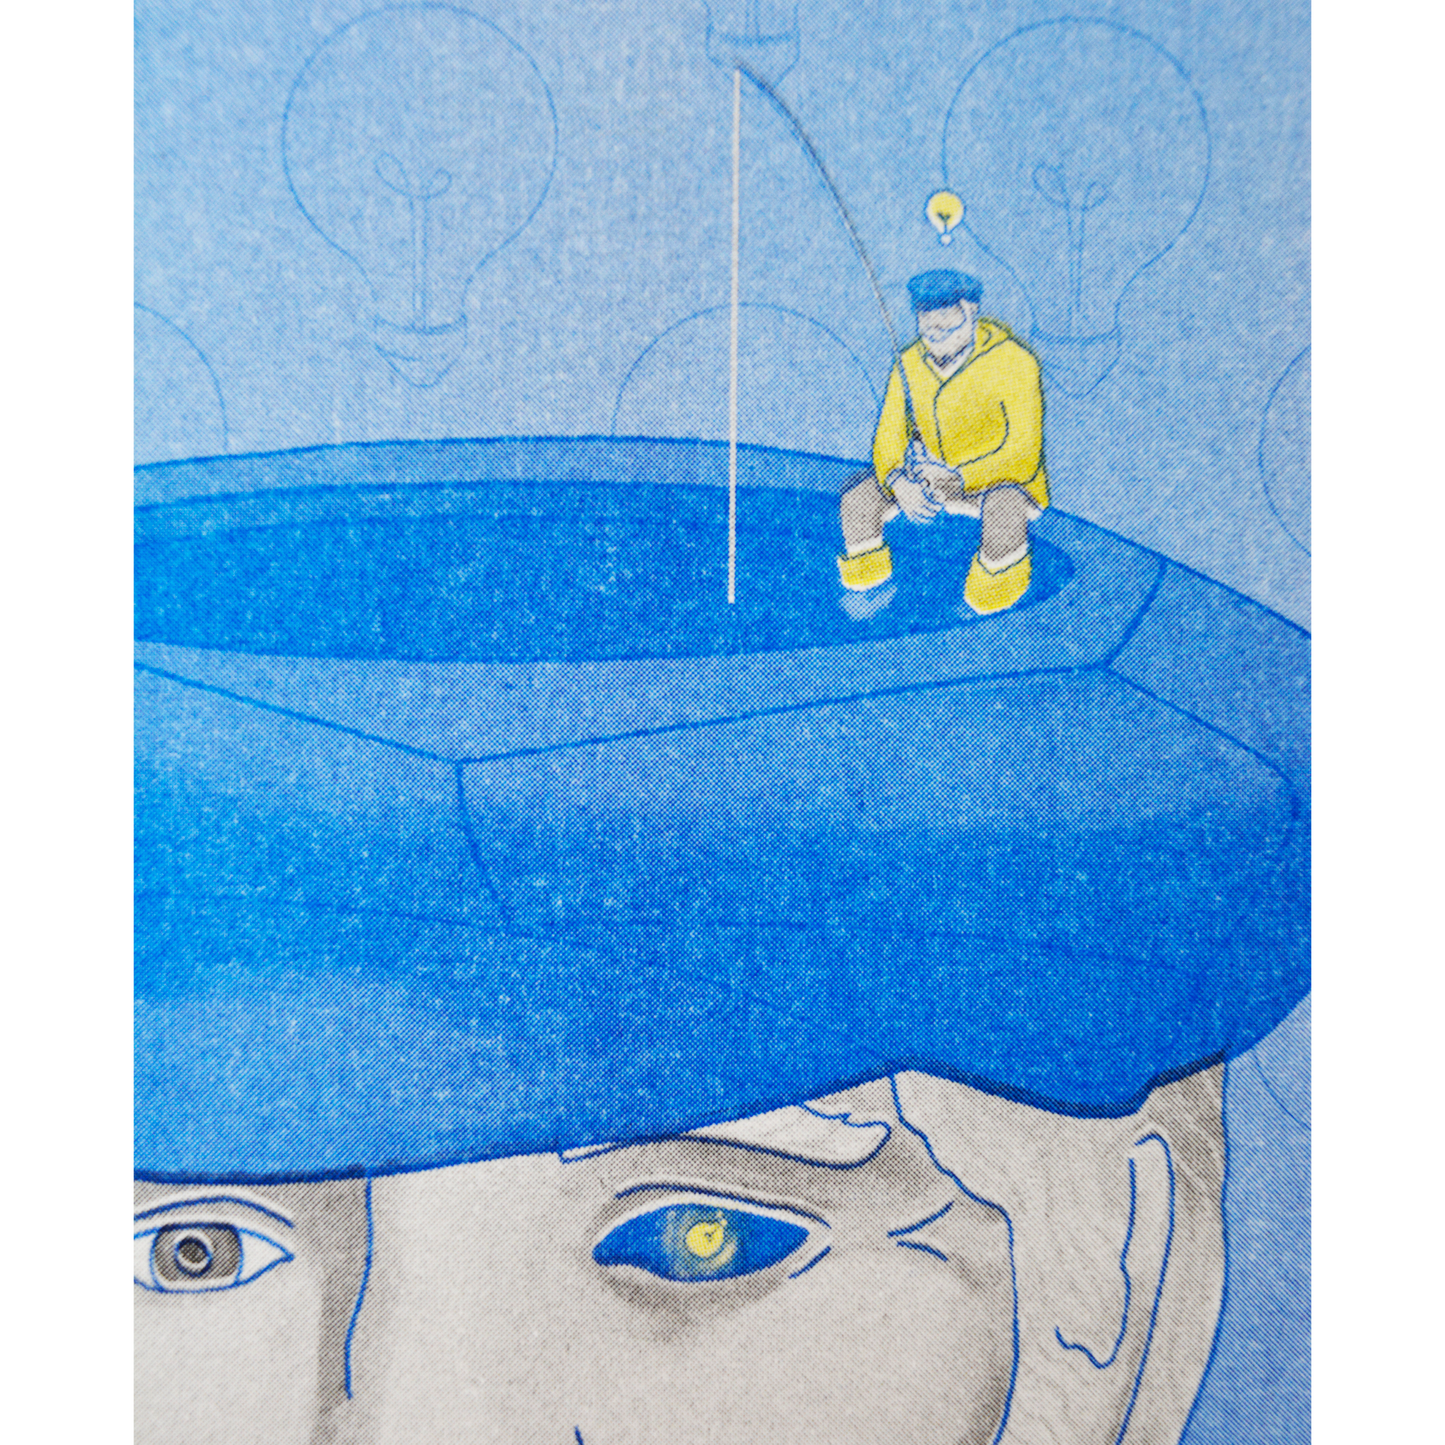 Fishing for ideas - A3 Riso print